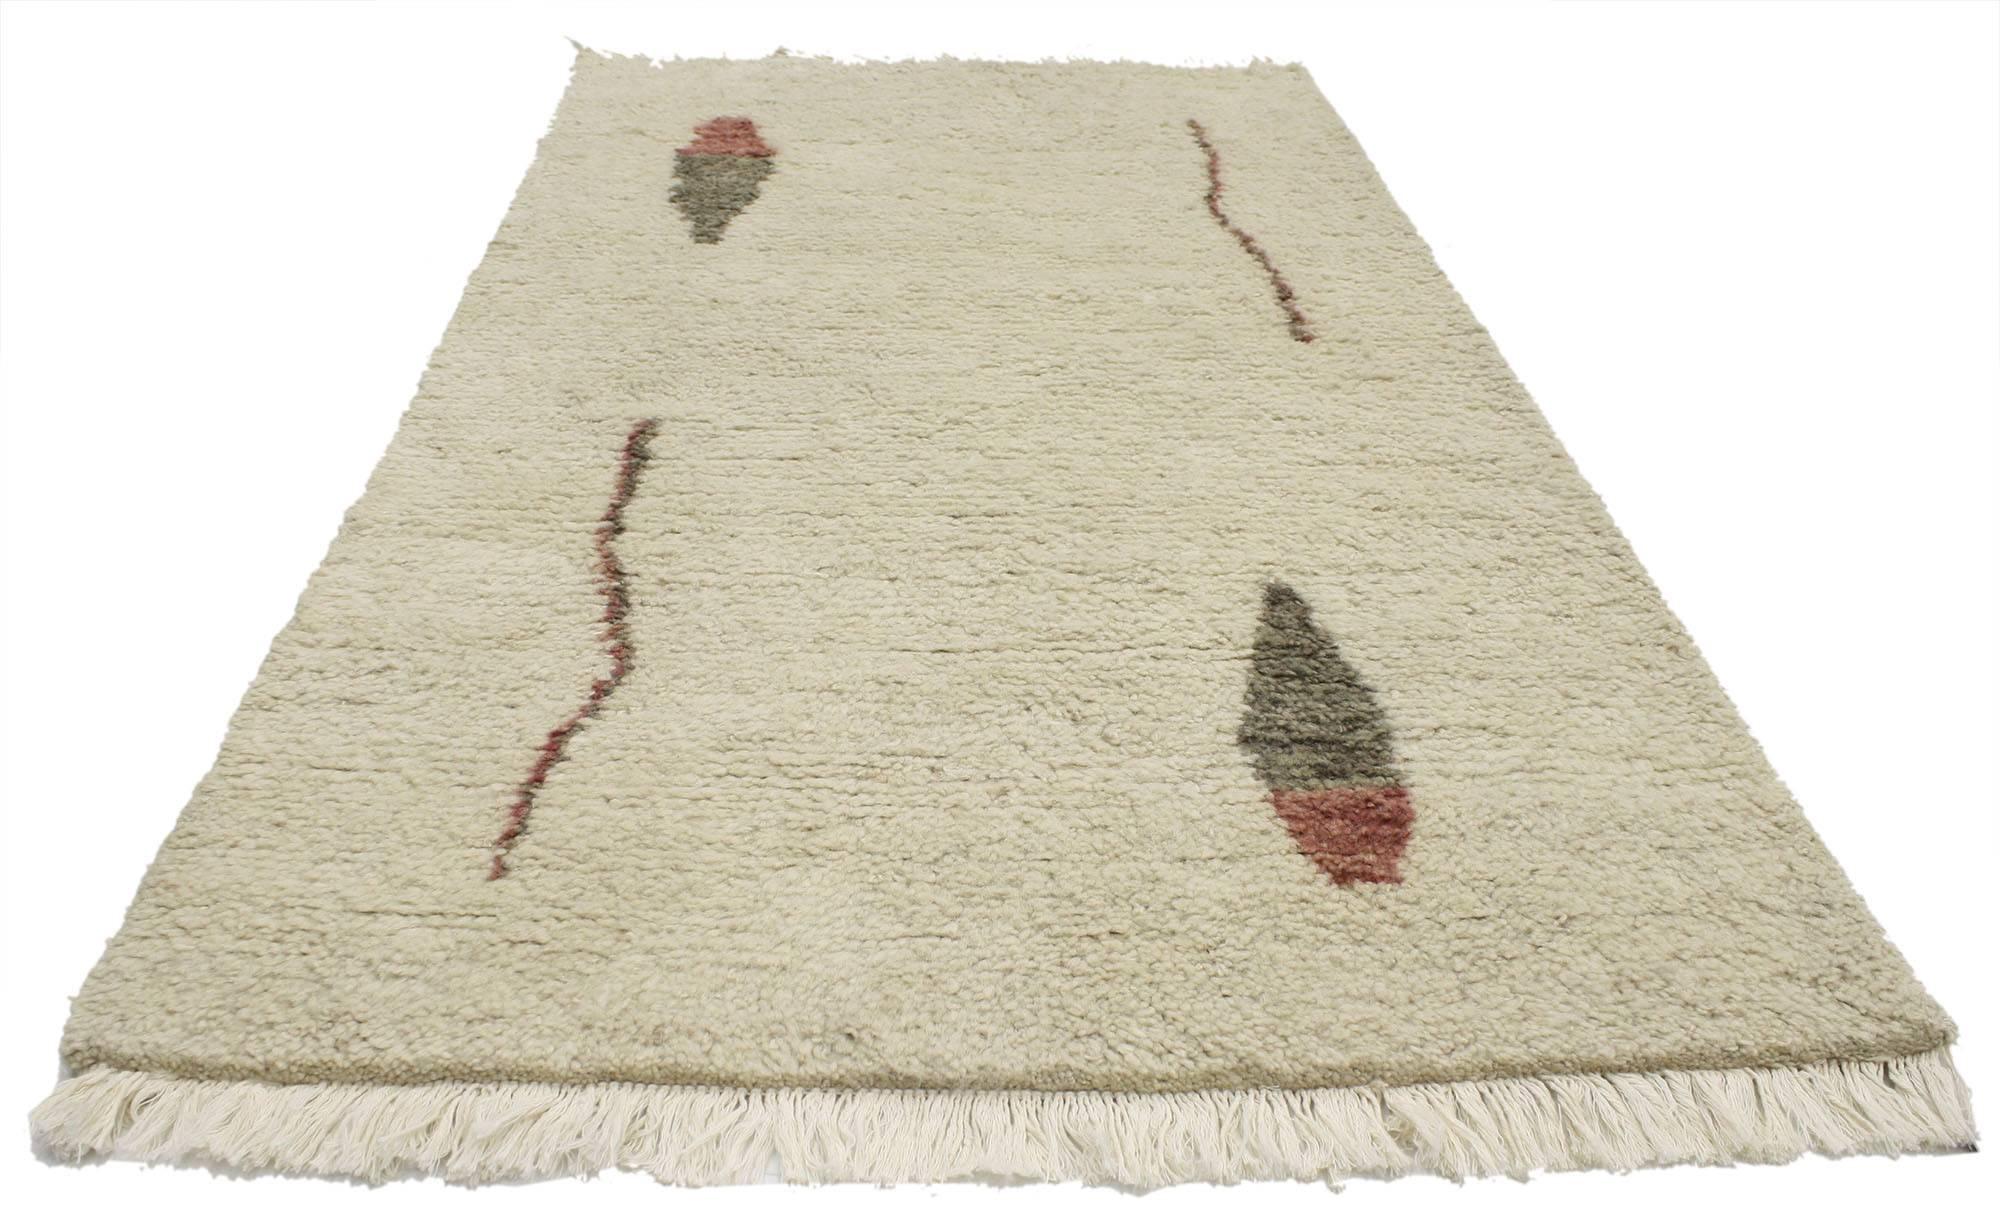 Indian Bauhaus Moroccan Style Rug with Alexander Calder Style and Abstract Art Design